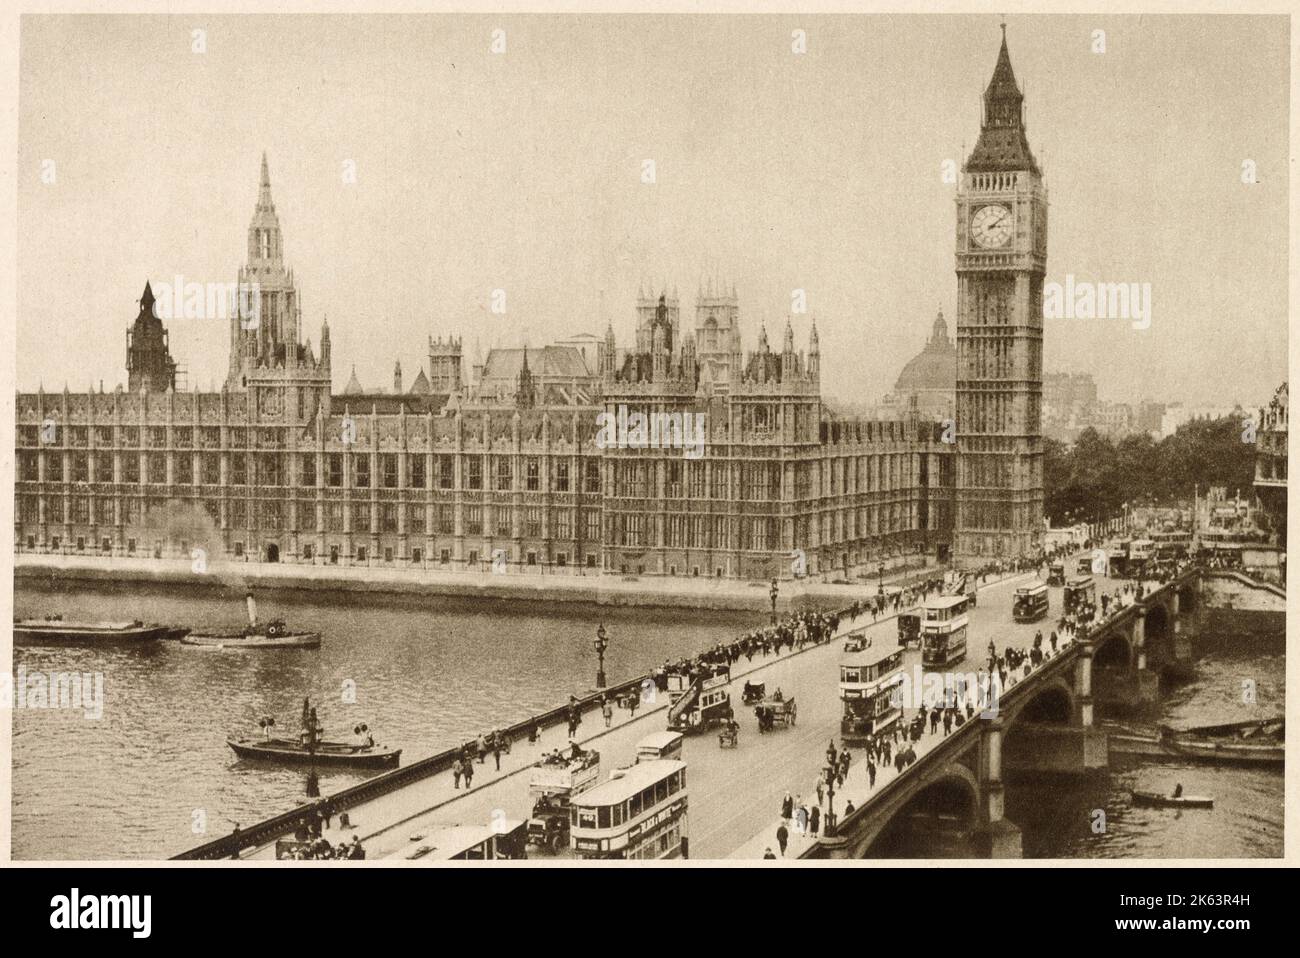 Photograph showing busy Westminster Bridge with pedestrians walking across and a steady flow of traffic made up of public transport trams, omnibuses and some horse and carts. Stock Photo